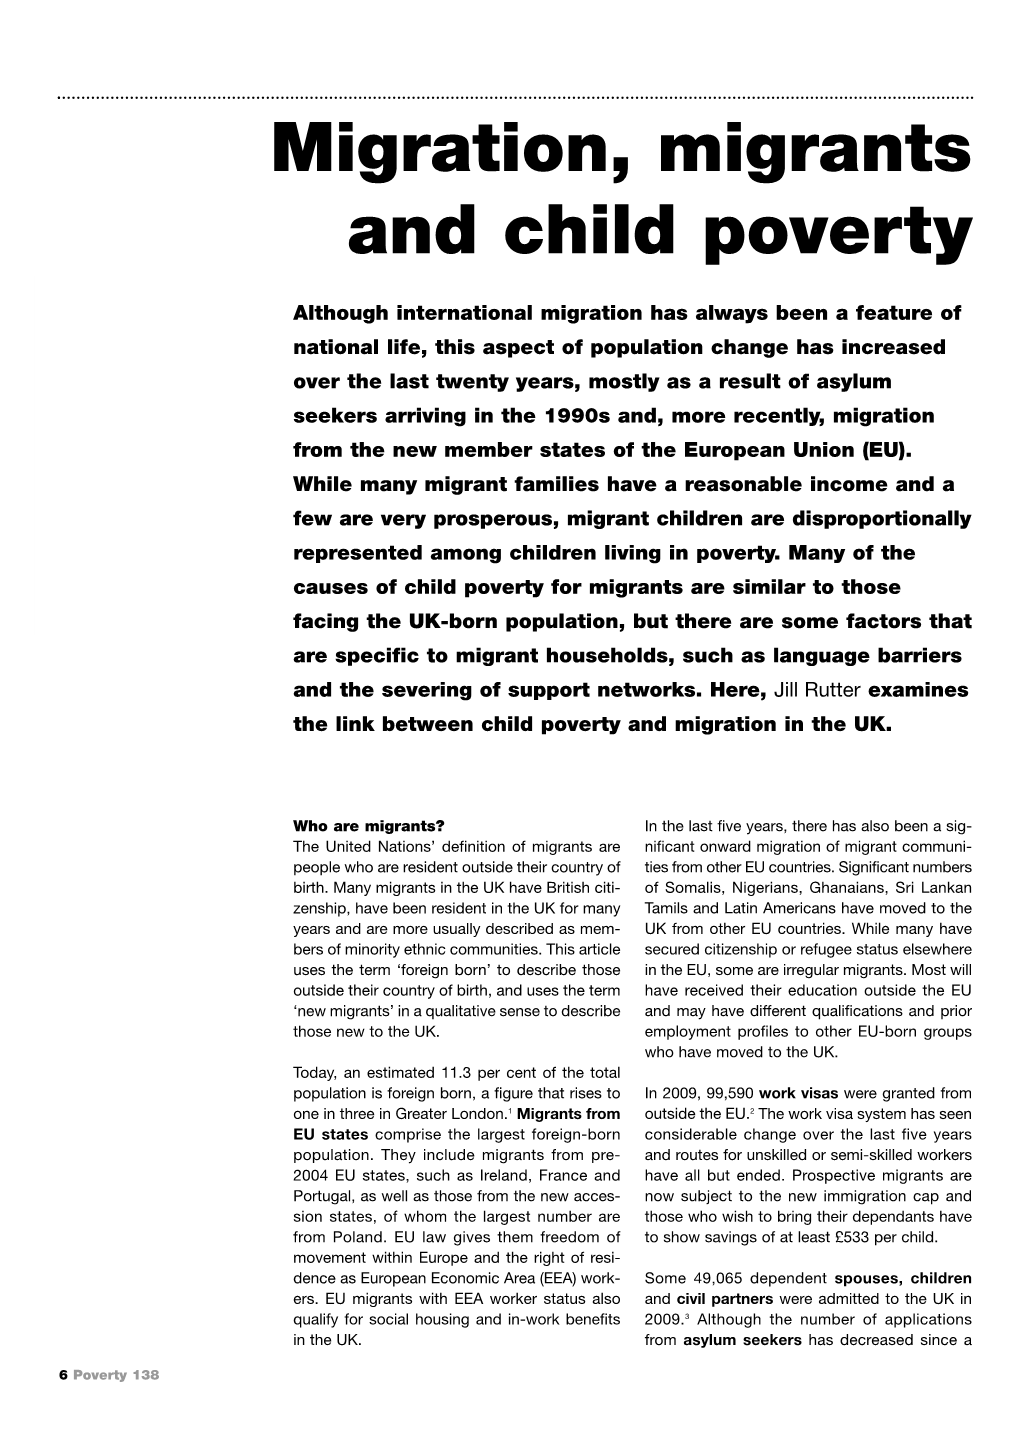 Migration, Migrants and Child Poverty